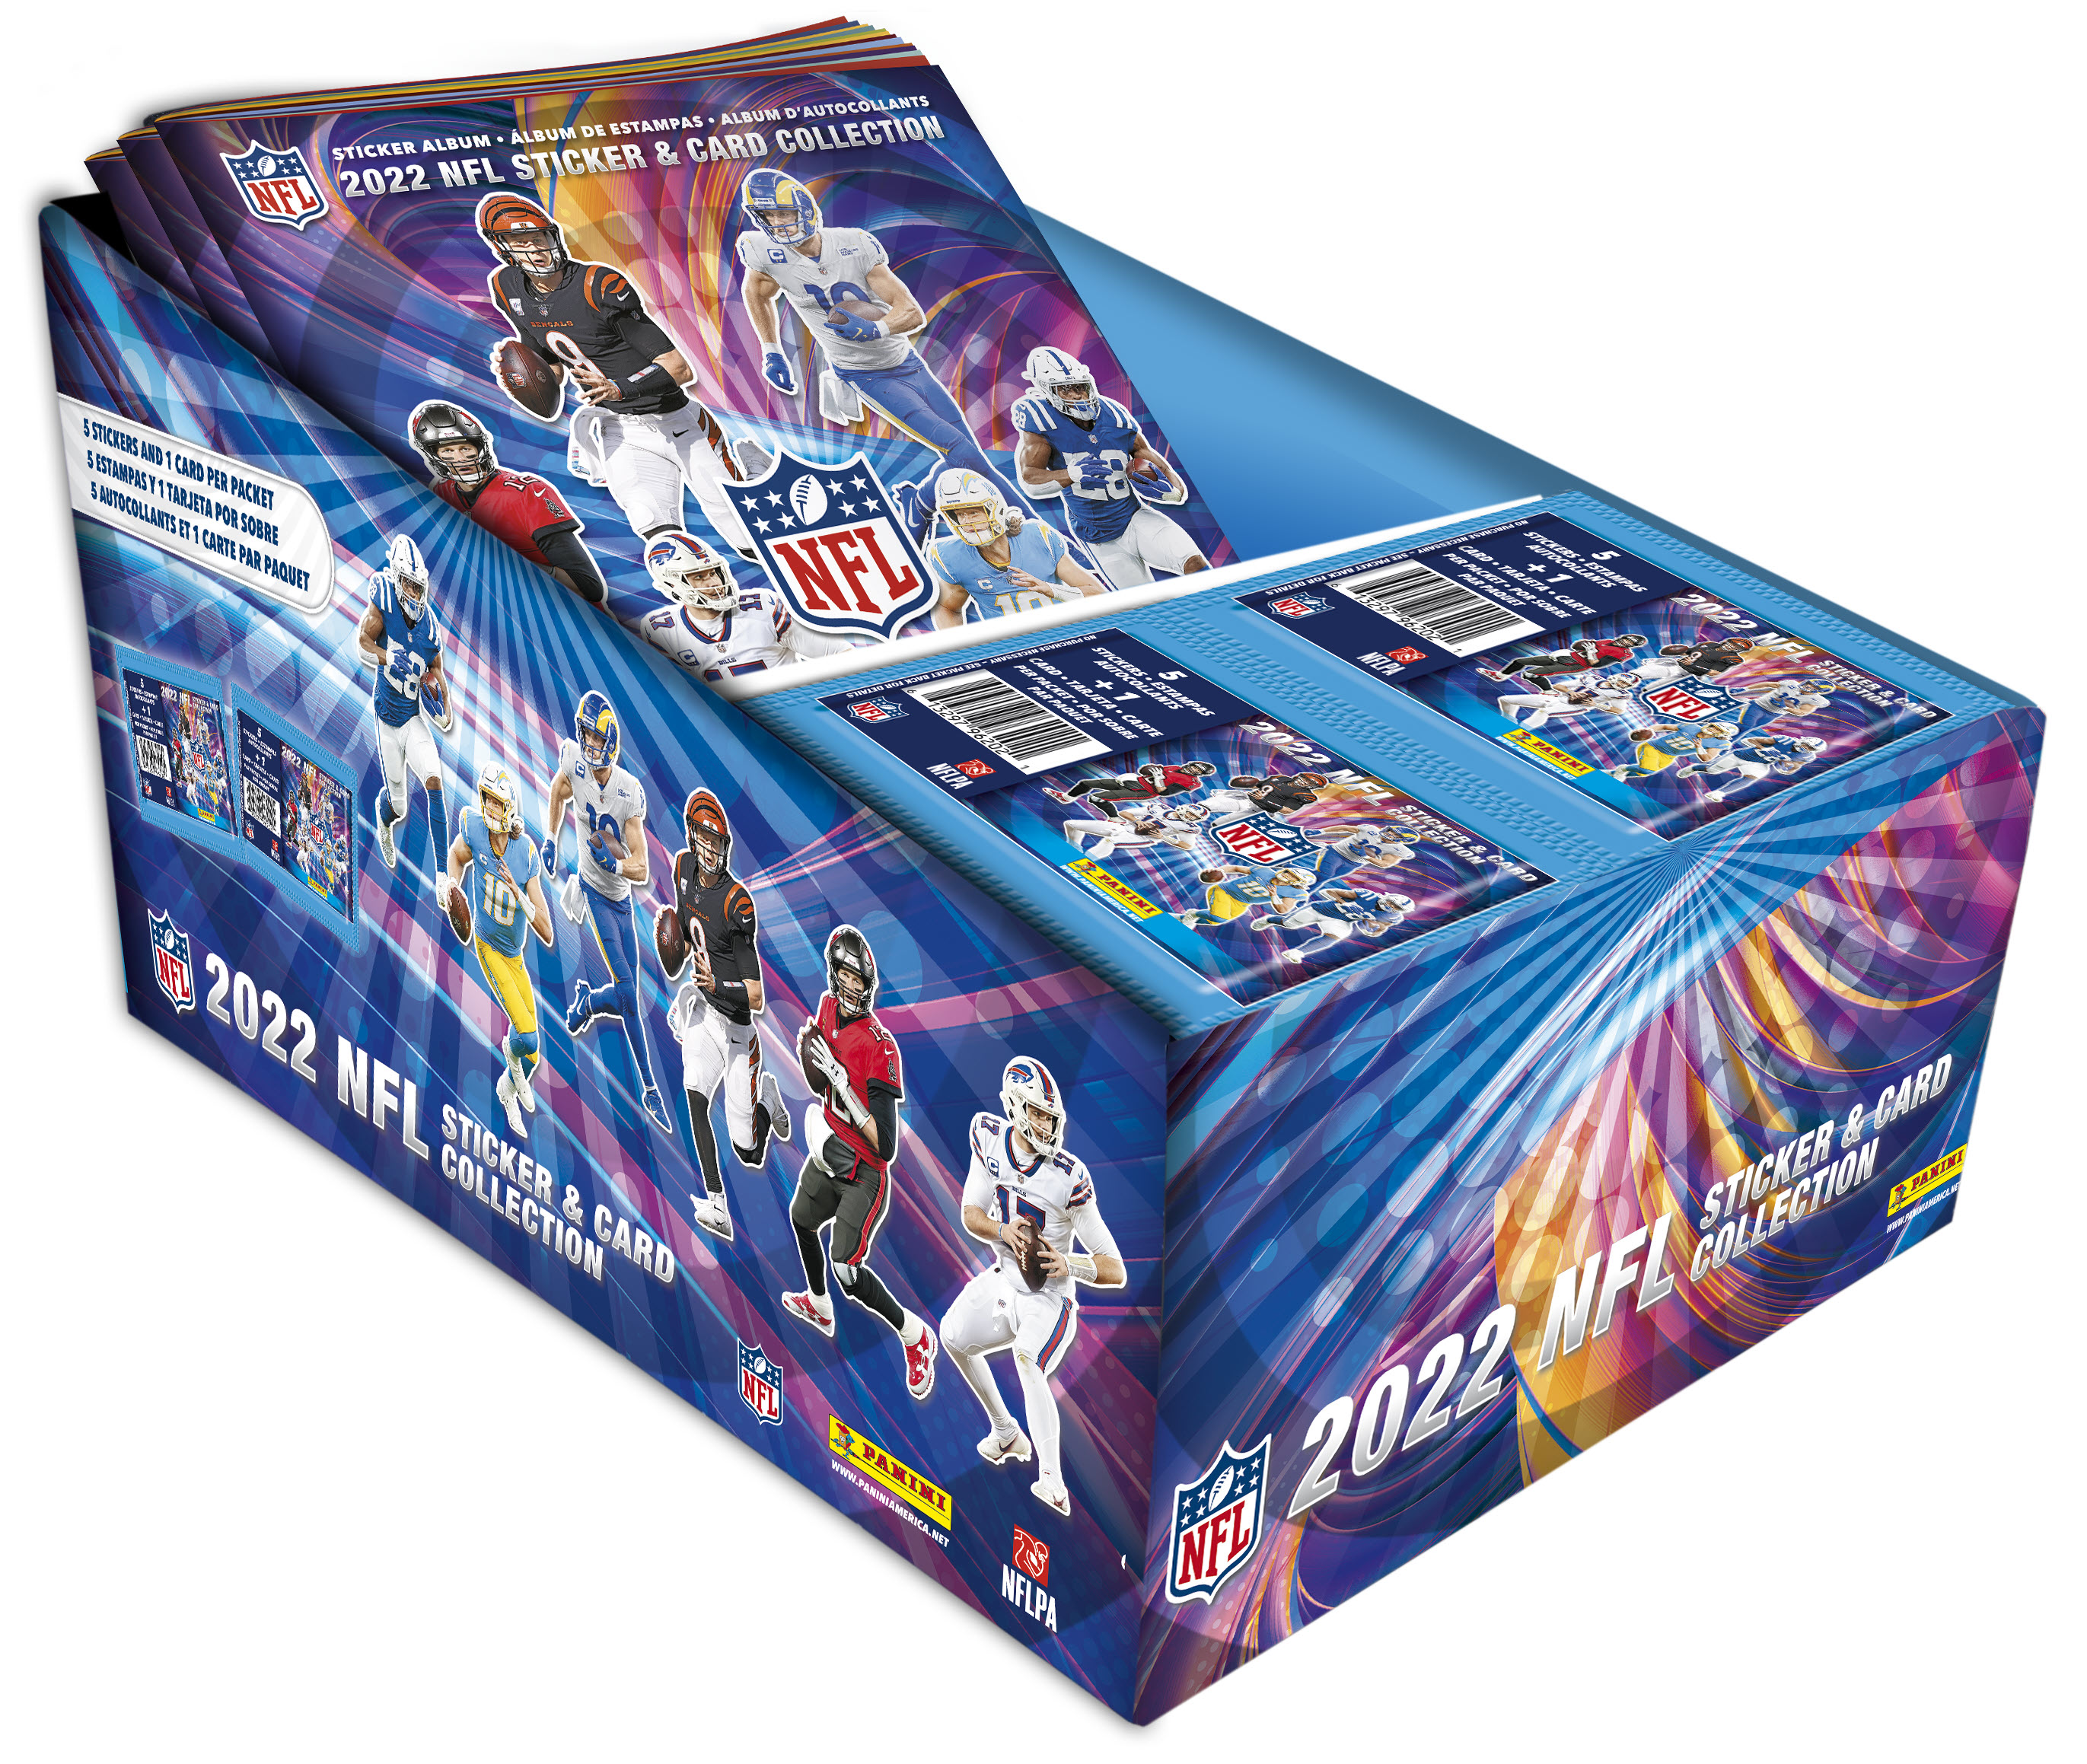 AVAILABLE WEDNESDAY (8/10)!! 2022 NFL Sticker & Card Collection The